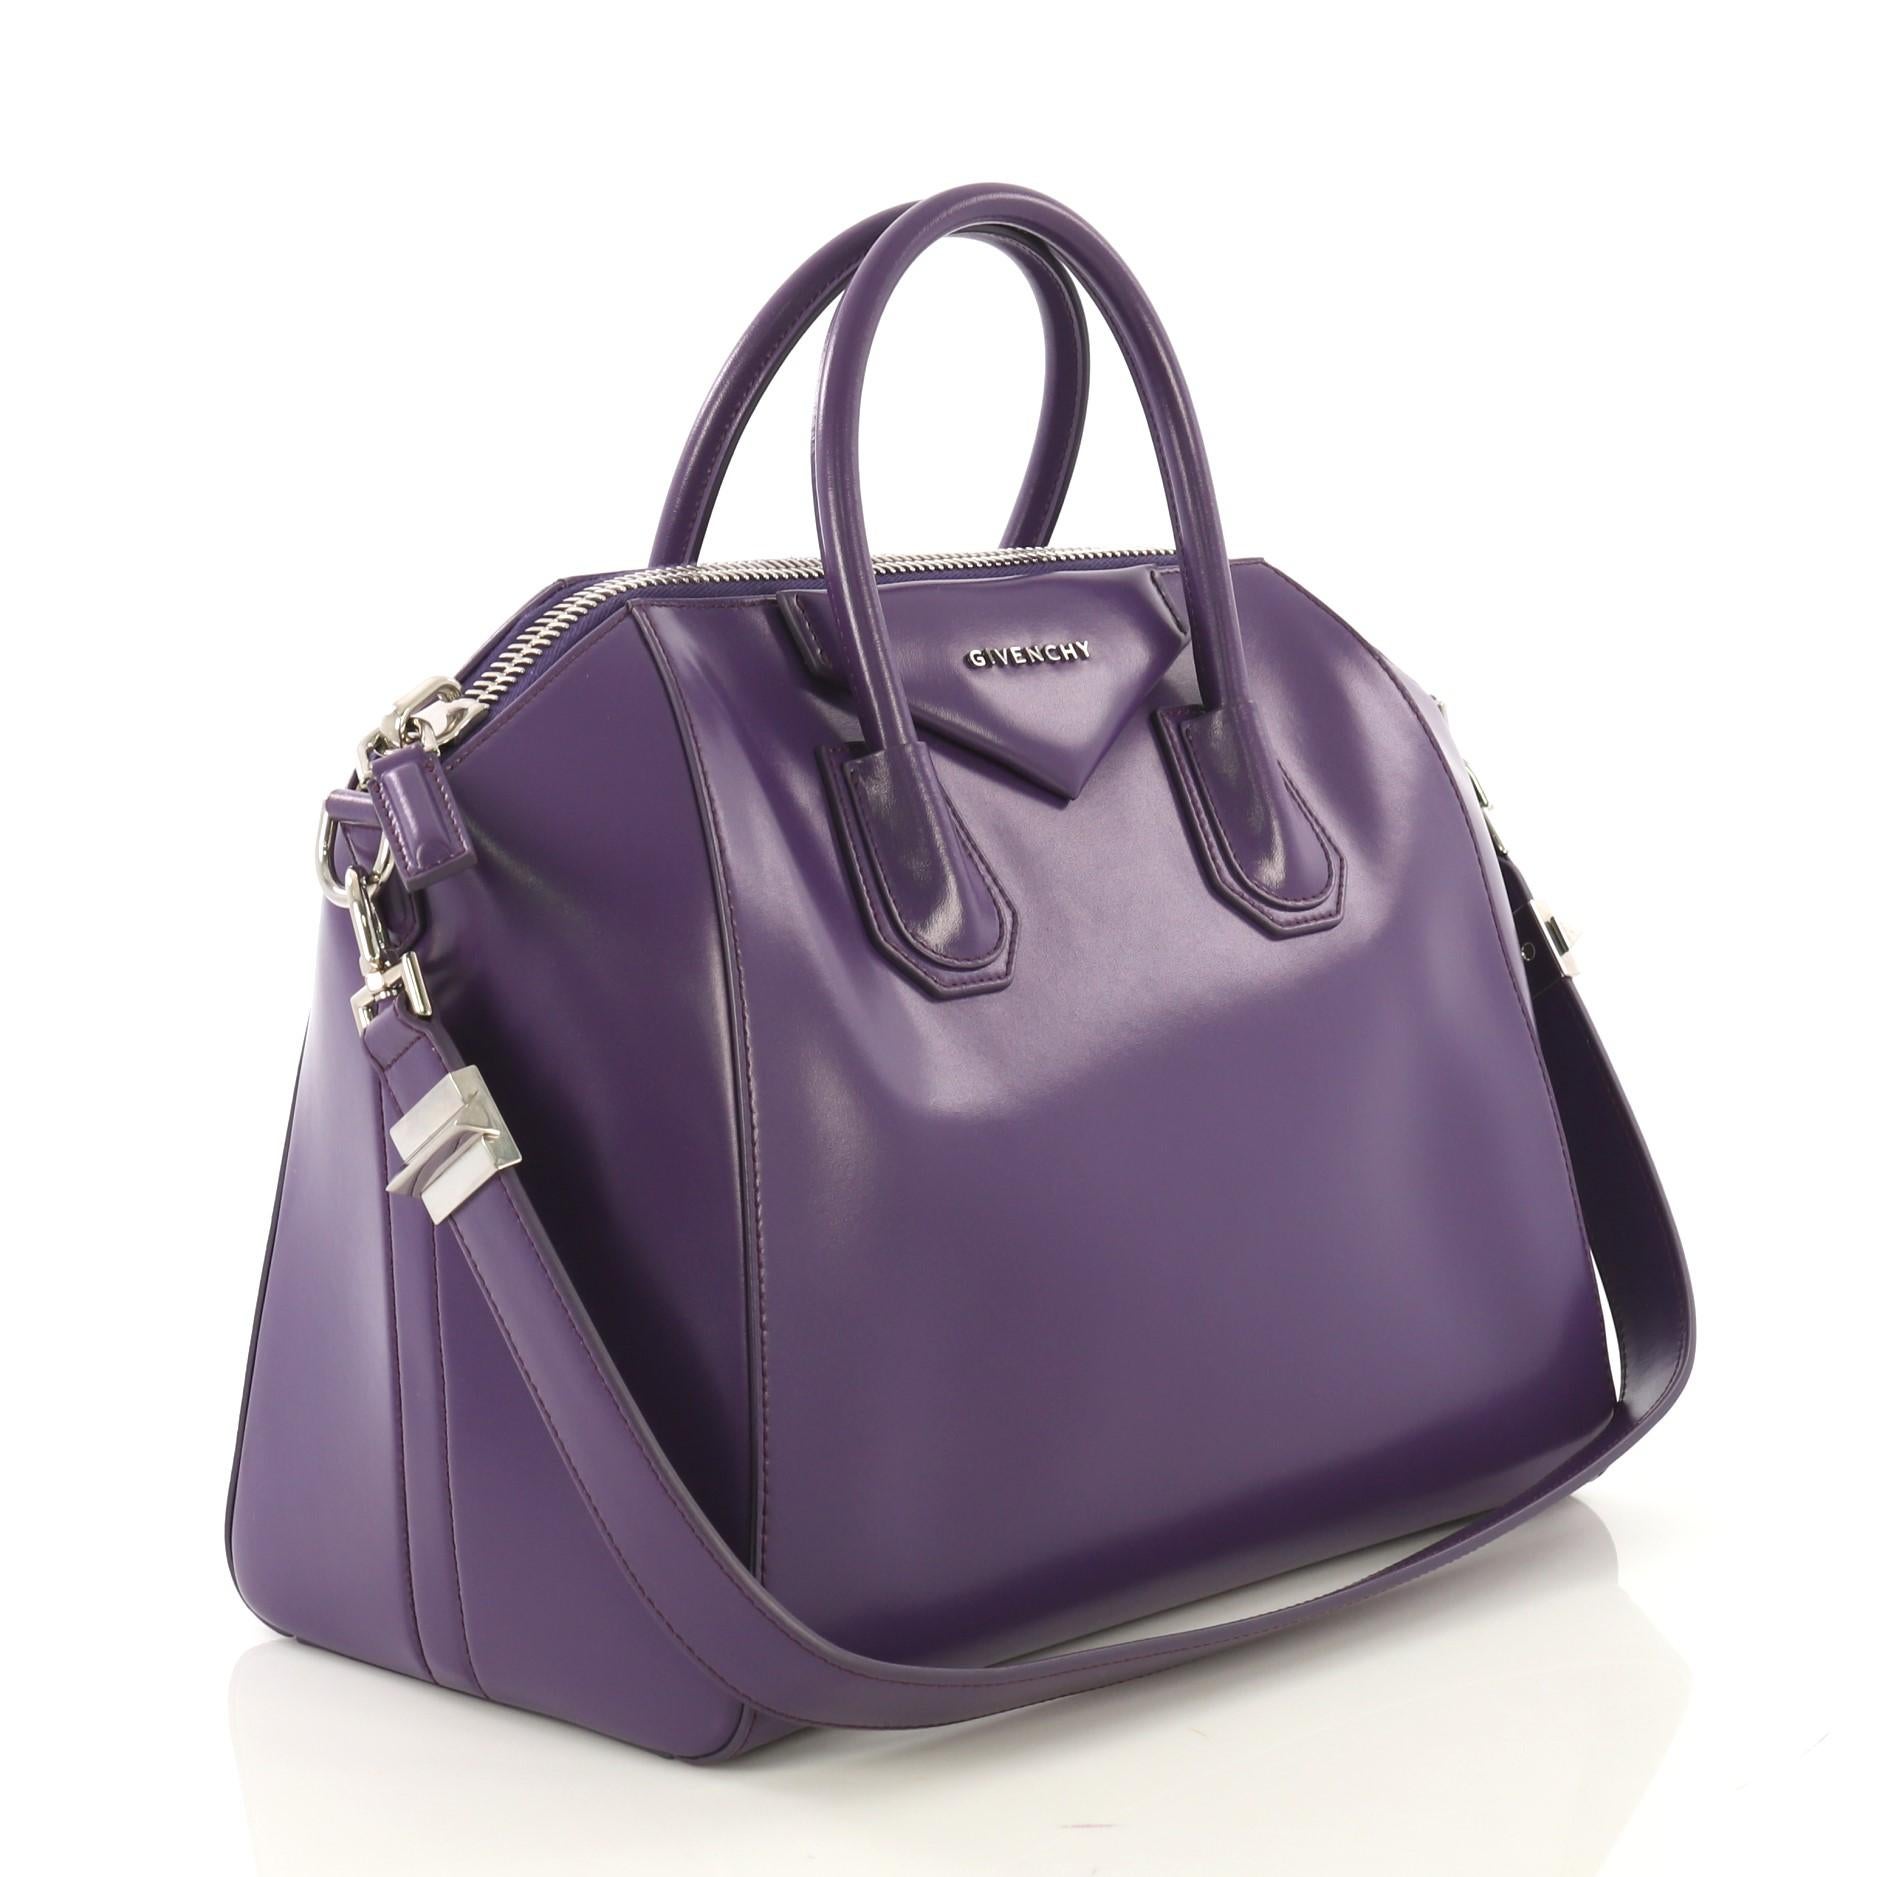 This Givenchy Antigona Bag Glazed Leather Medium, crafted from purple glazed leather, features dual rolled leather handles and silver-tone hardware. Its zip closure opens to a beige fabric interior with zip and slip pockets. .

Estimated Retail